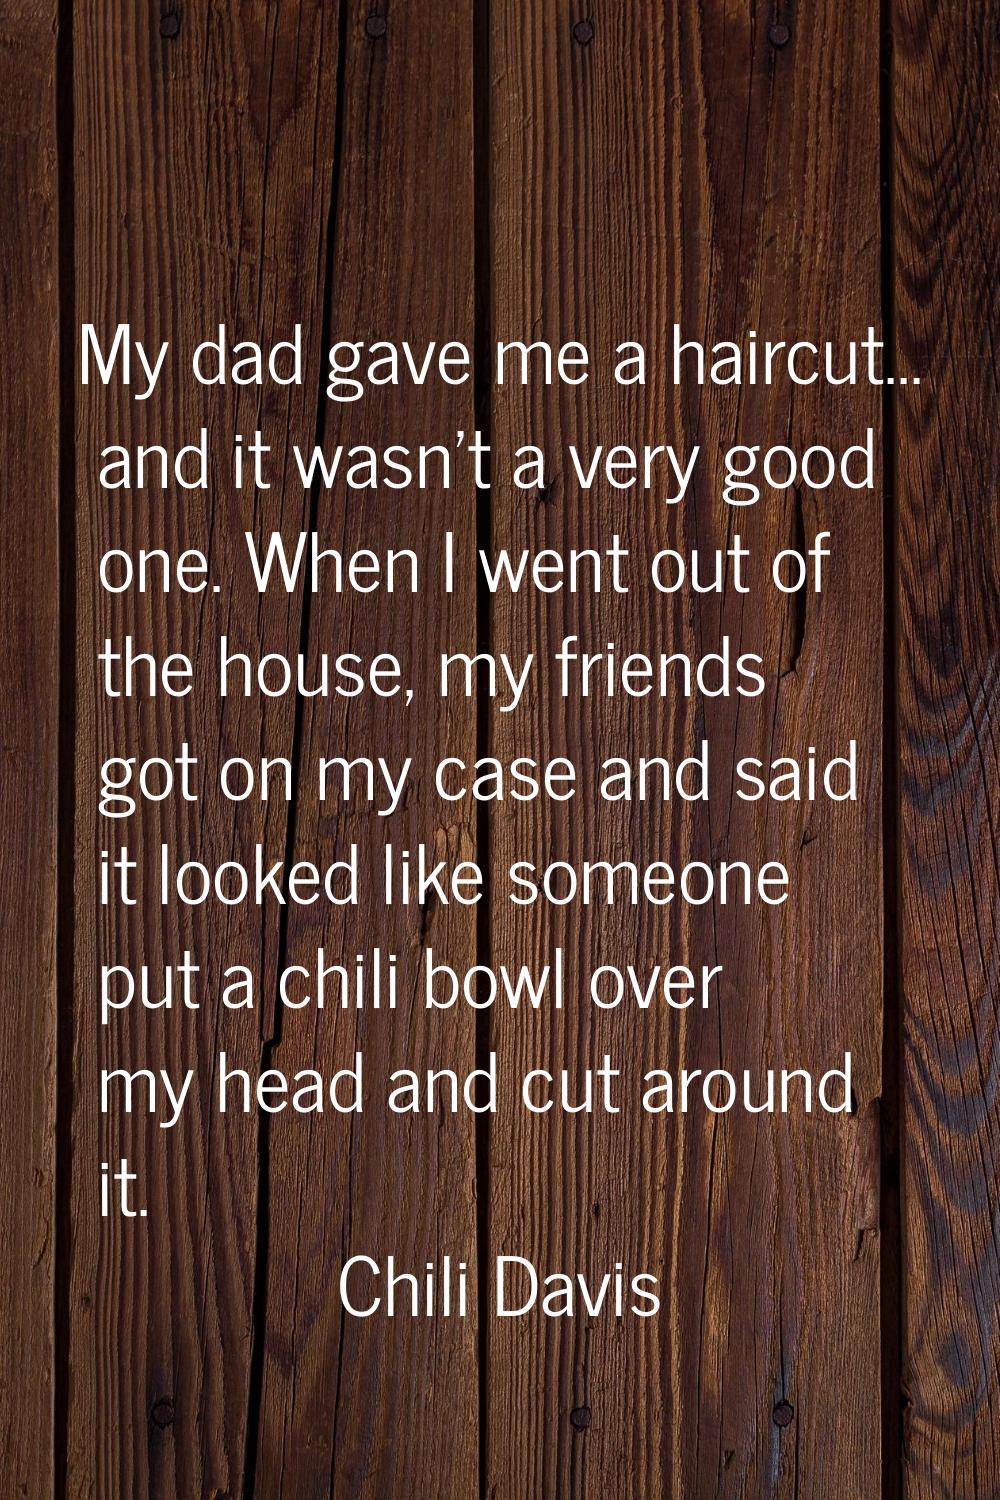 My dad gave me a haircut... and it wasn't a very good one. When I went out of the house, my friends